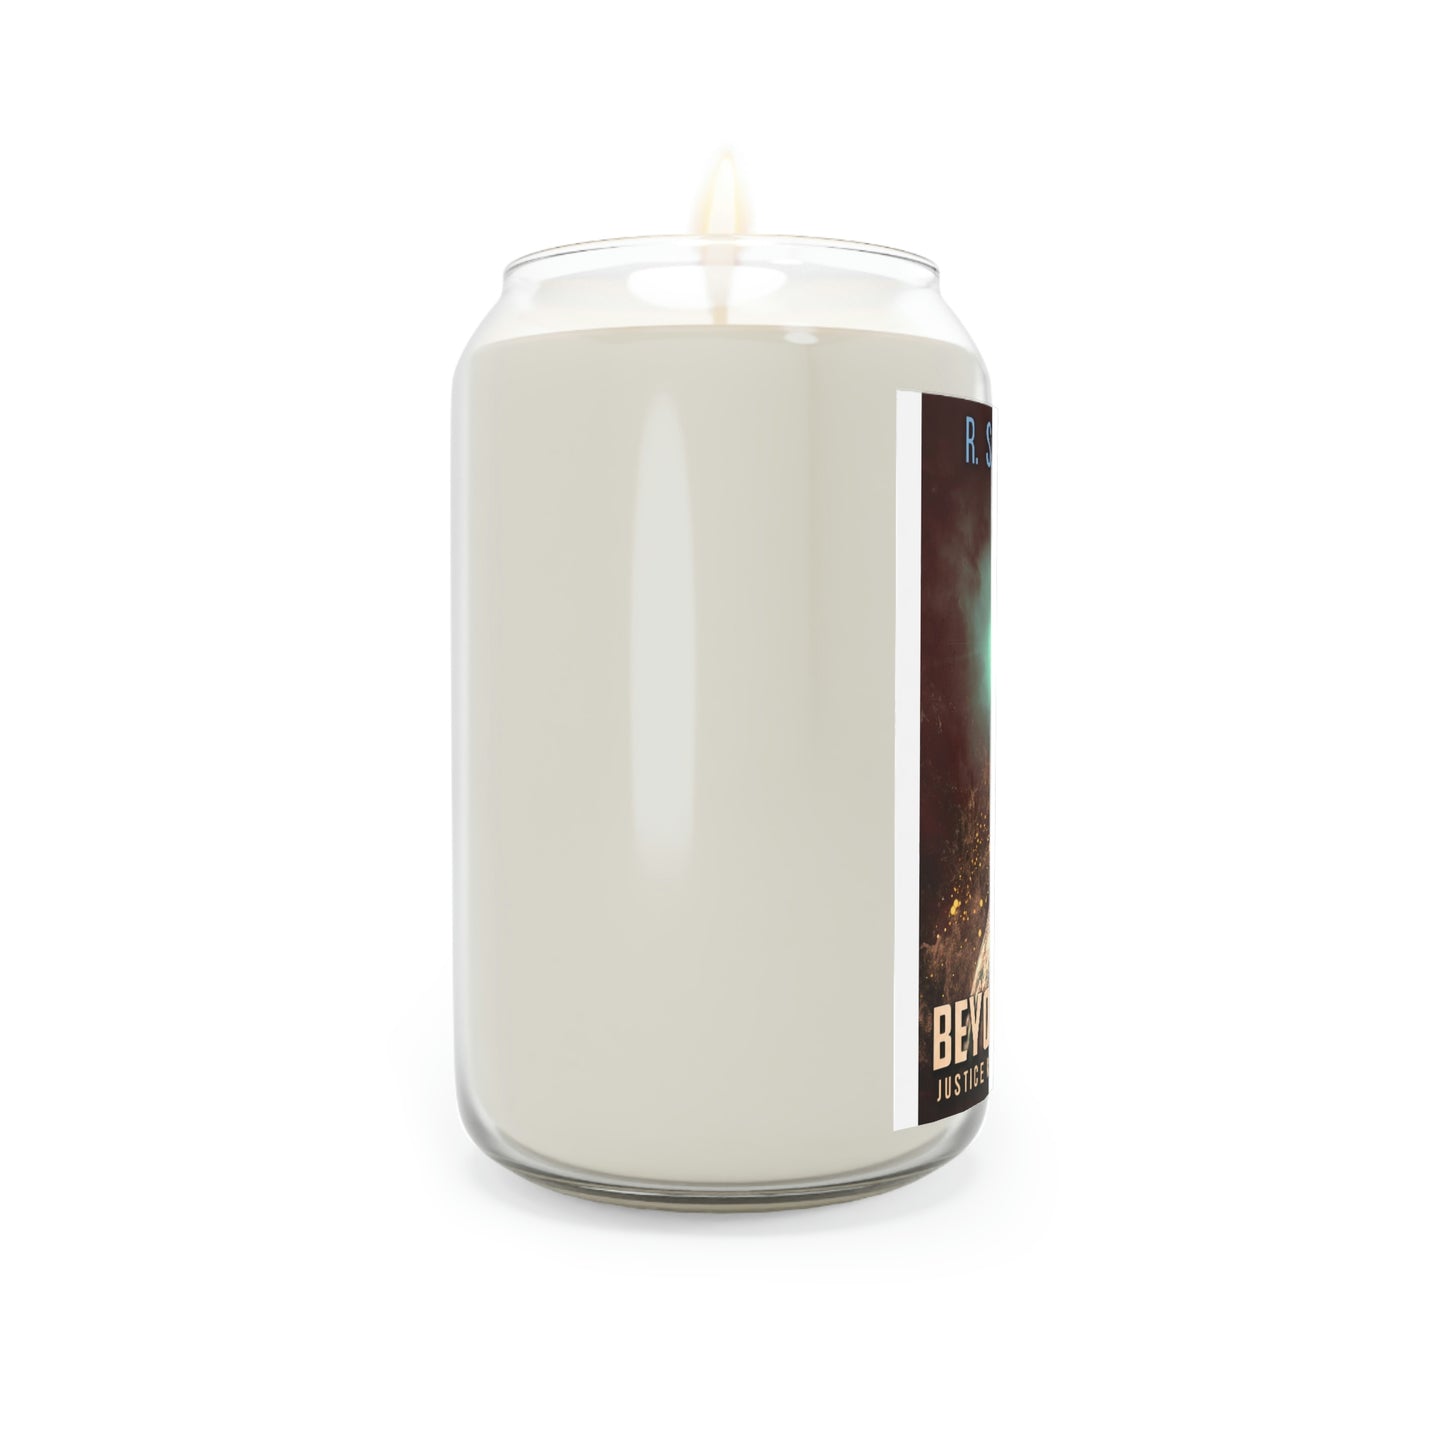 Beyond The Veil - Scented Candle